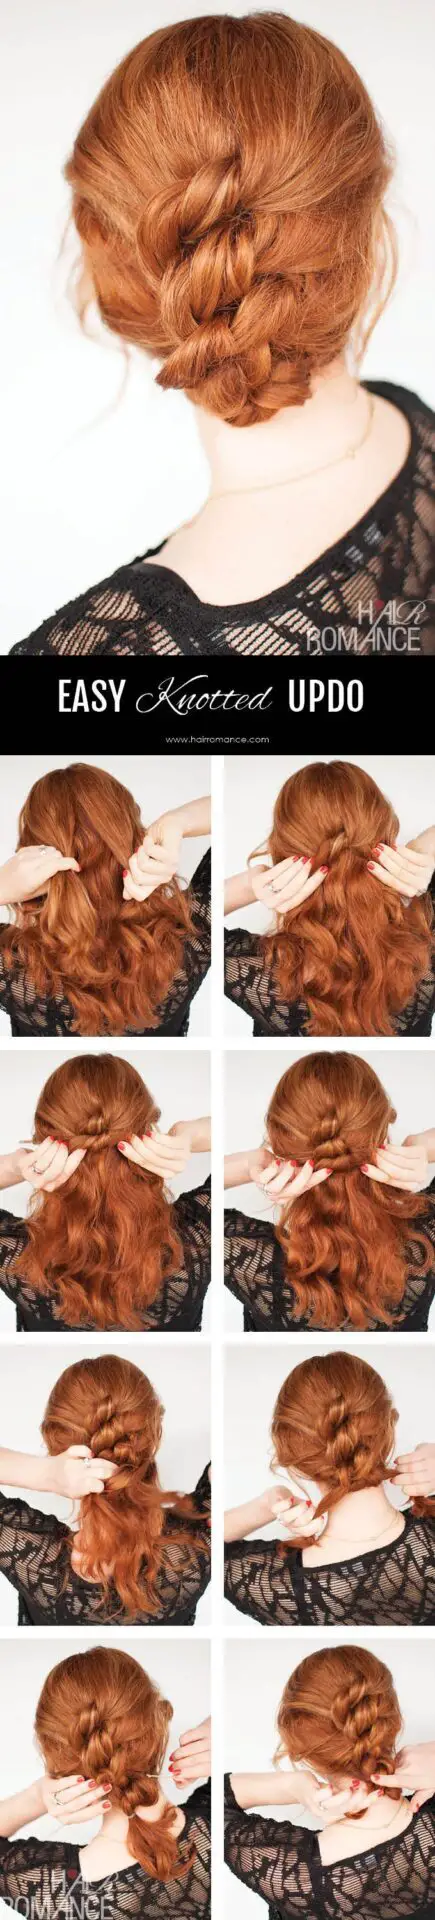 knotted-updo-tutorial1